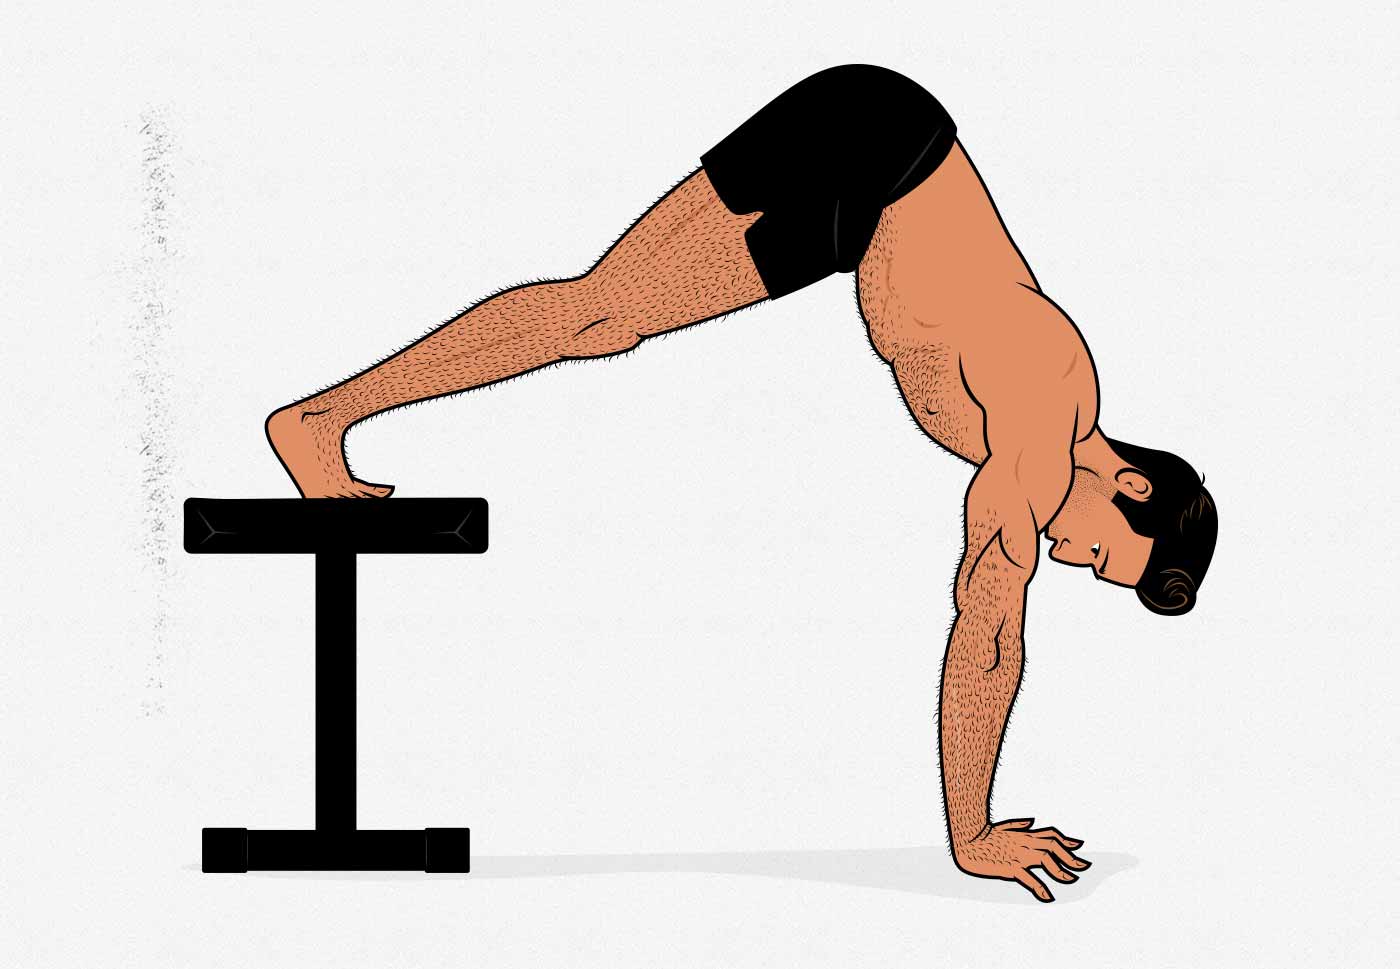 Illustration of a man doing a pike push-up with his feet raised.